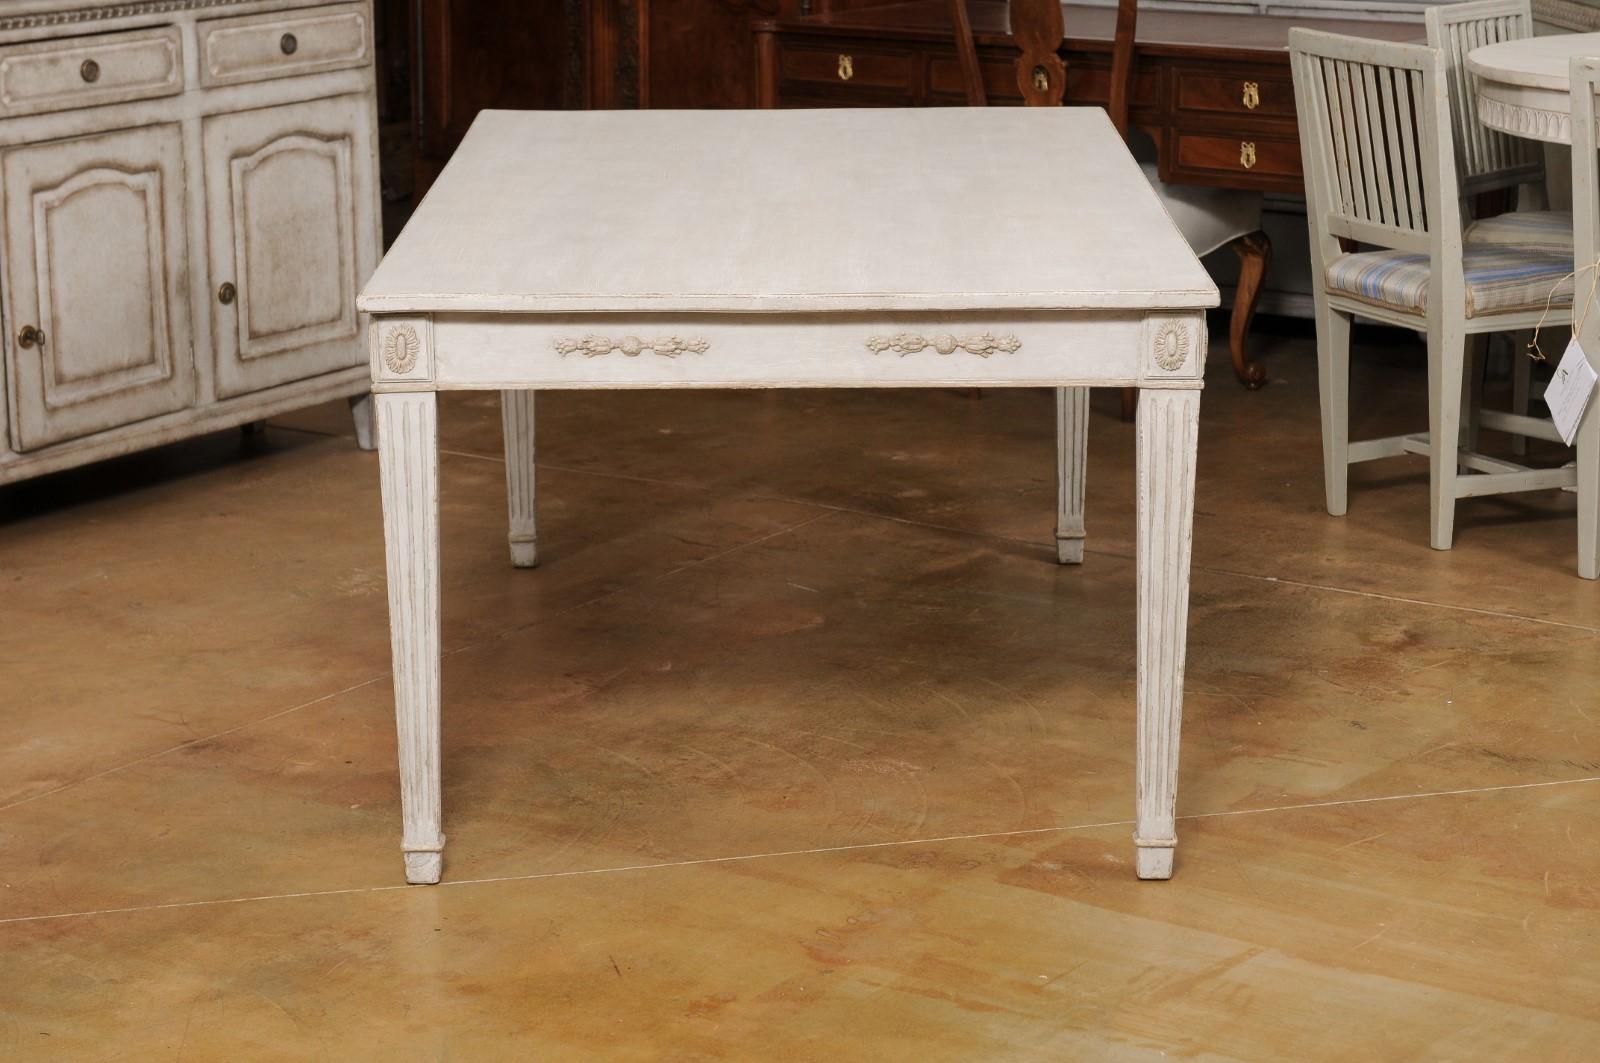 Swedish 1900 Gustavian Style Dining Table with Carved Apron and Fluted Legs In Good Condition For Sale In Atlanta, GA